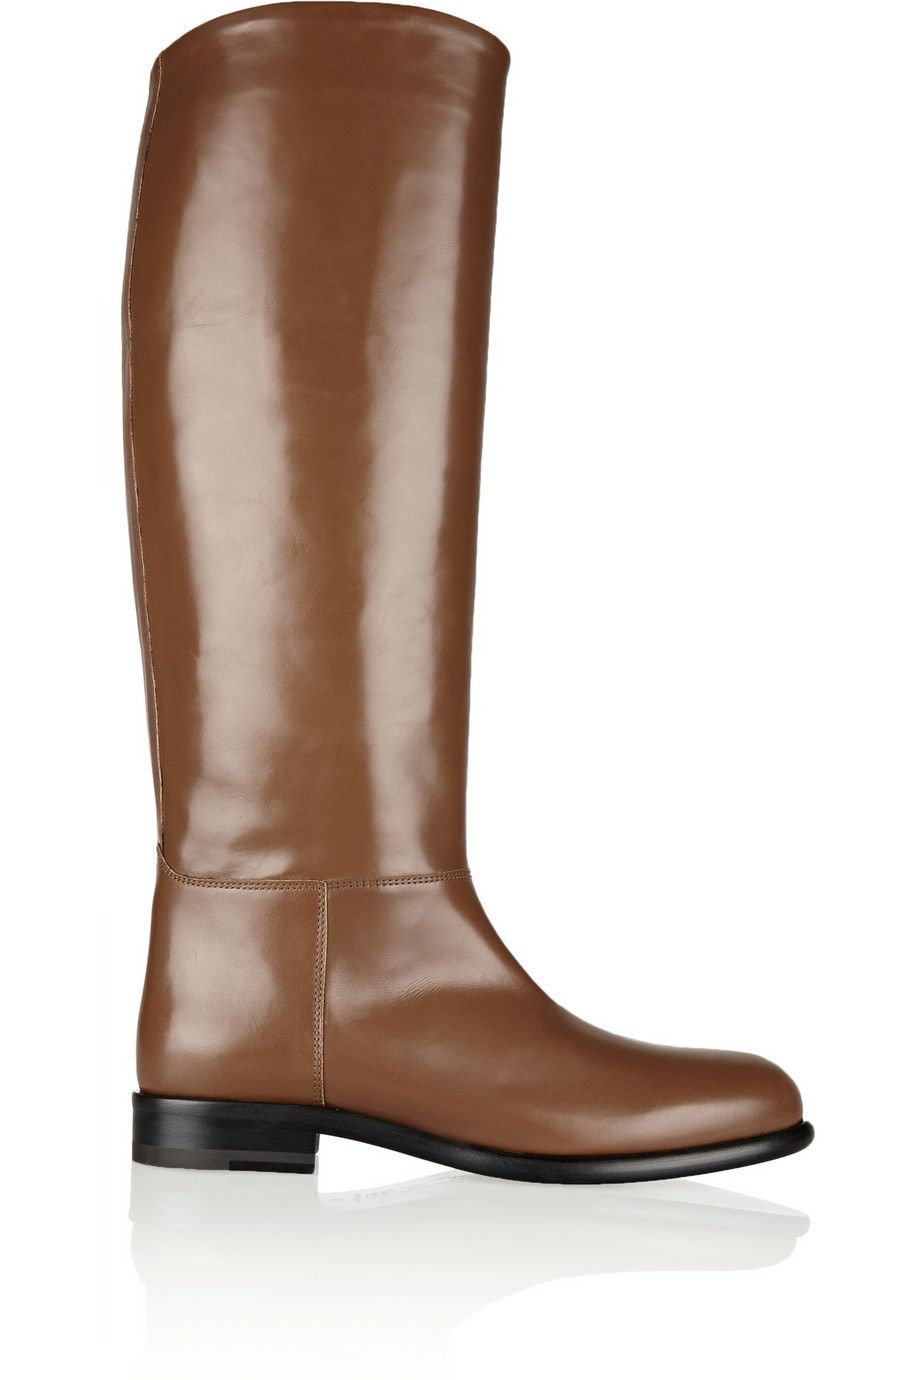 Brown, Boot, Riding boot, Tan, Leather, Liver, Beige, Maroon, Bronze, Knee-high boot, 